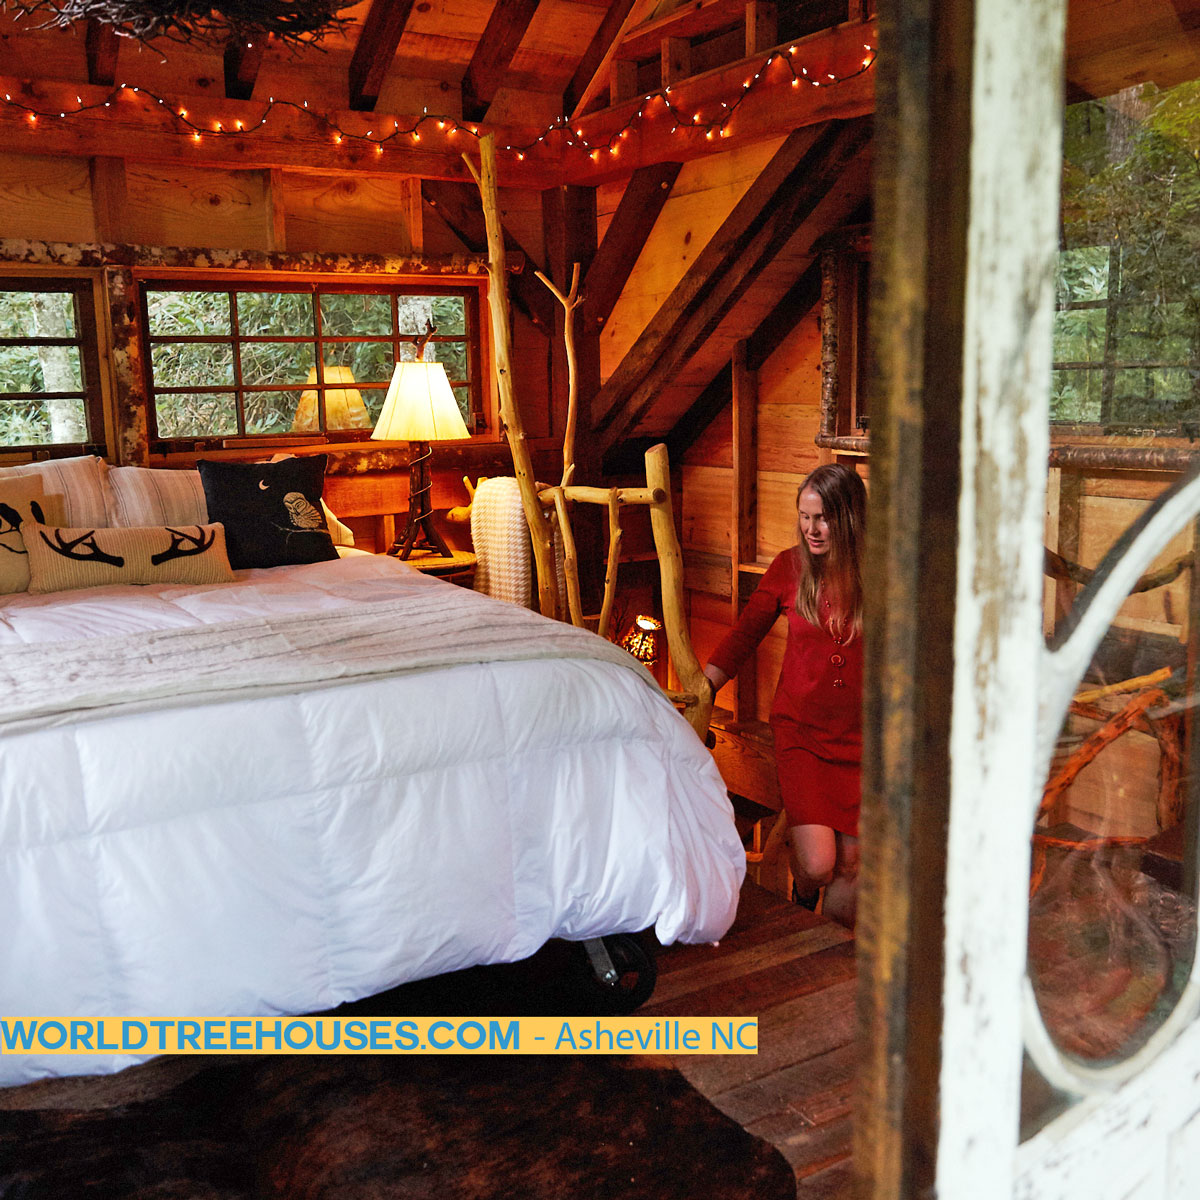 Asheville tree house builder: Panthertown Treehouse: Deep rest in the forest’s embrace